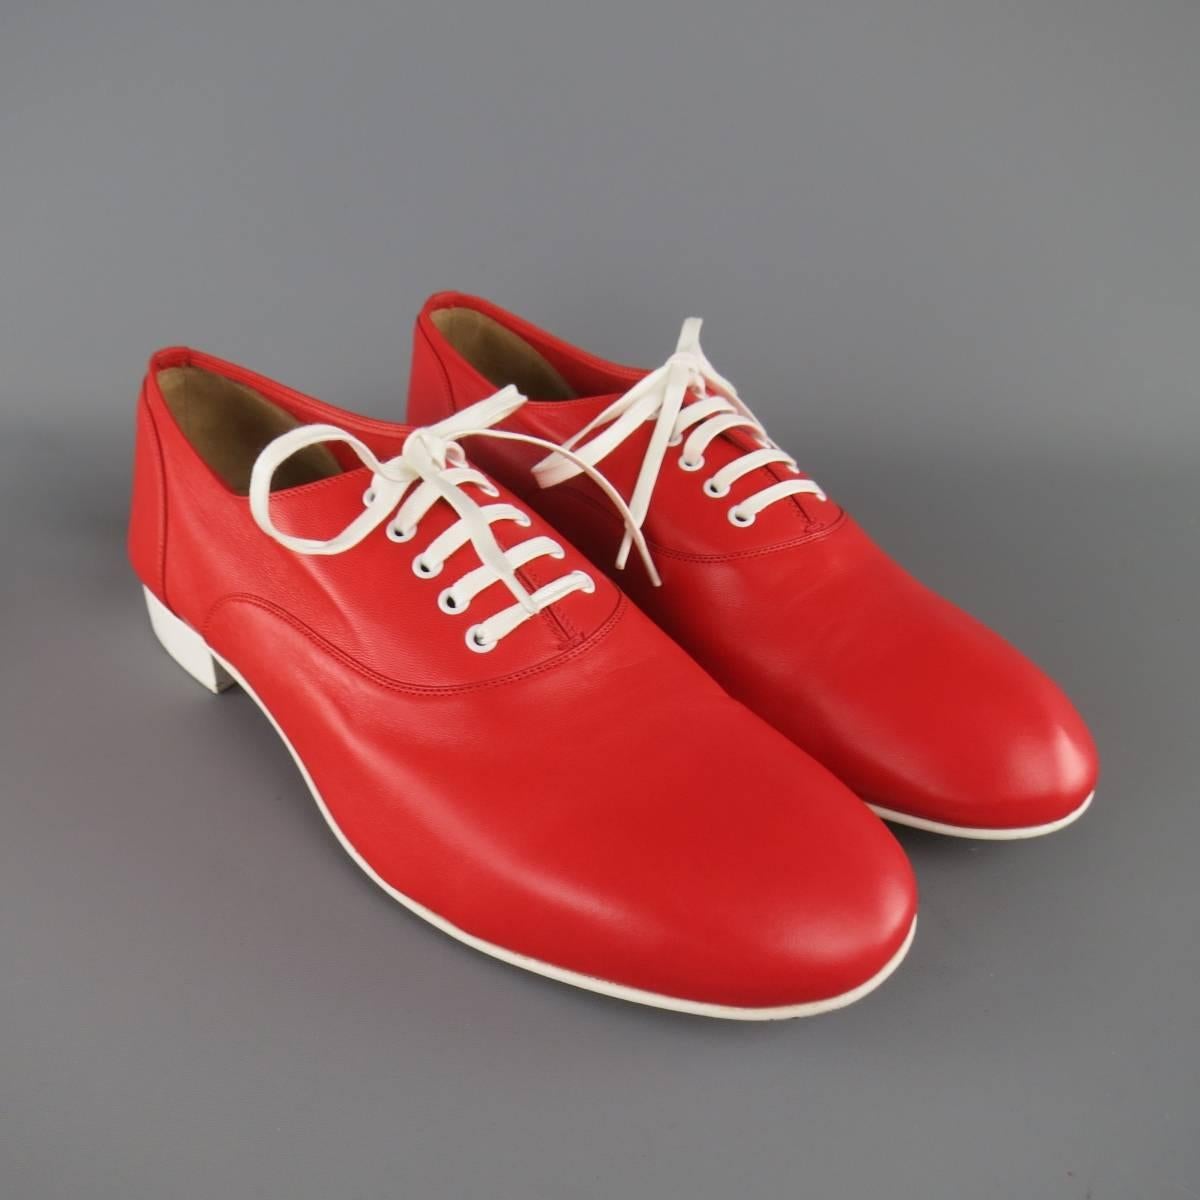 CHRISTIAN LOUBOUTIN "Alfred Flat" lace ups in a vibrant red soft leather featuring a white midsole, grommets, and heel with signature red sole. With Box. Made in Italy.
 
Excellent Pre-Owned Condition.
Marked: IT 42
 
Outsole: 11 x 4 in.